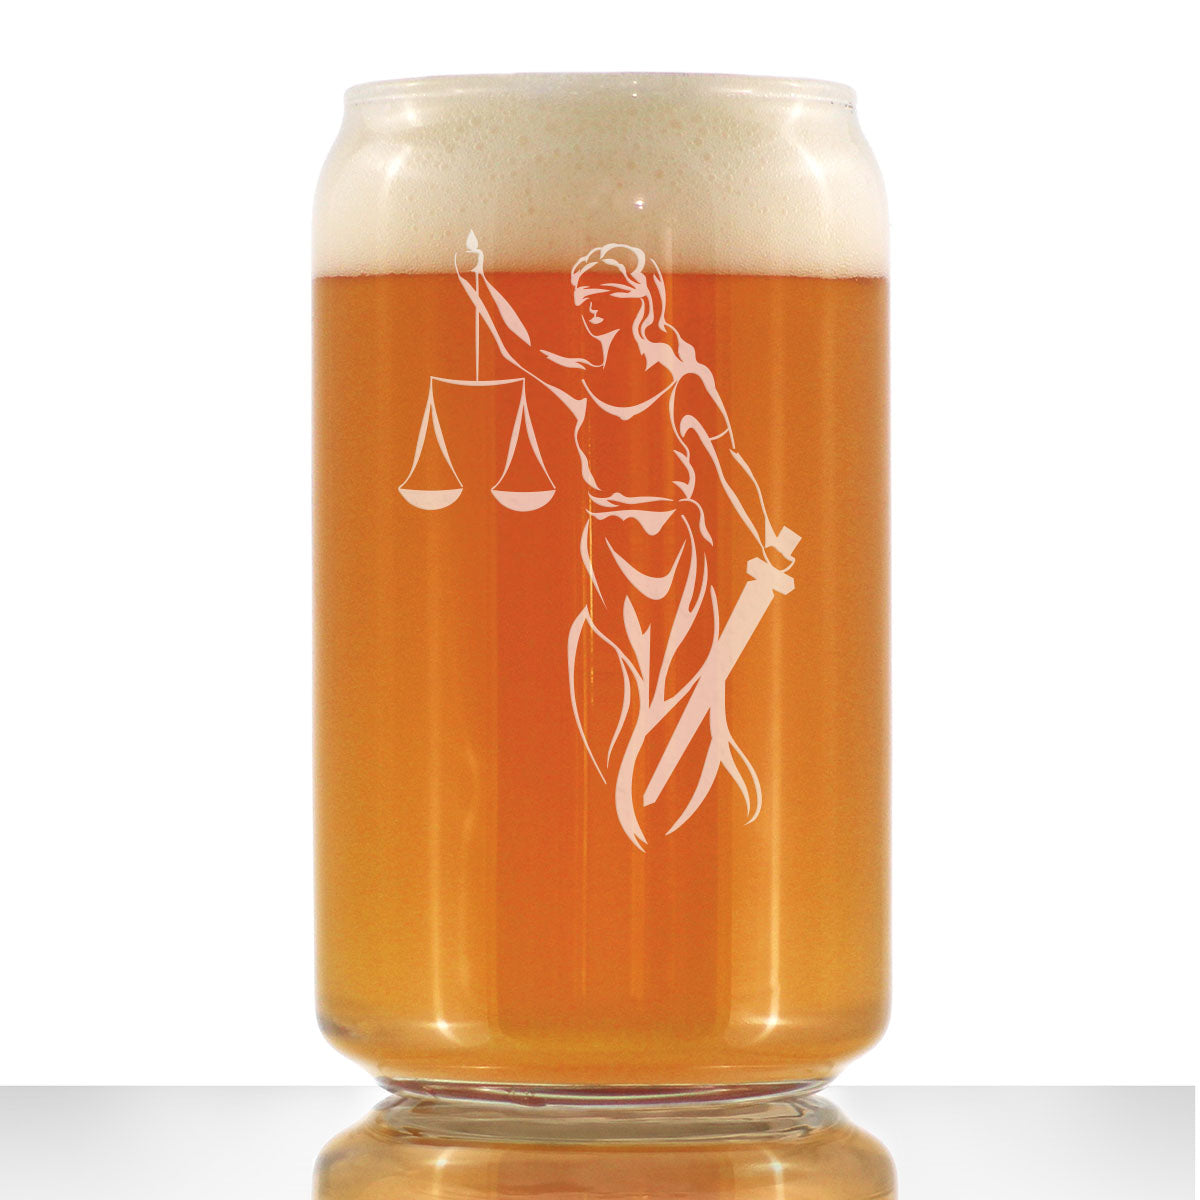 Lady Justice Beer Can Pint Glass - Lawyers and Attorneys Themed Gifts or Party Décor for Women and Men - 16 oz Glasses